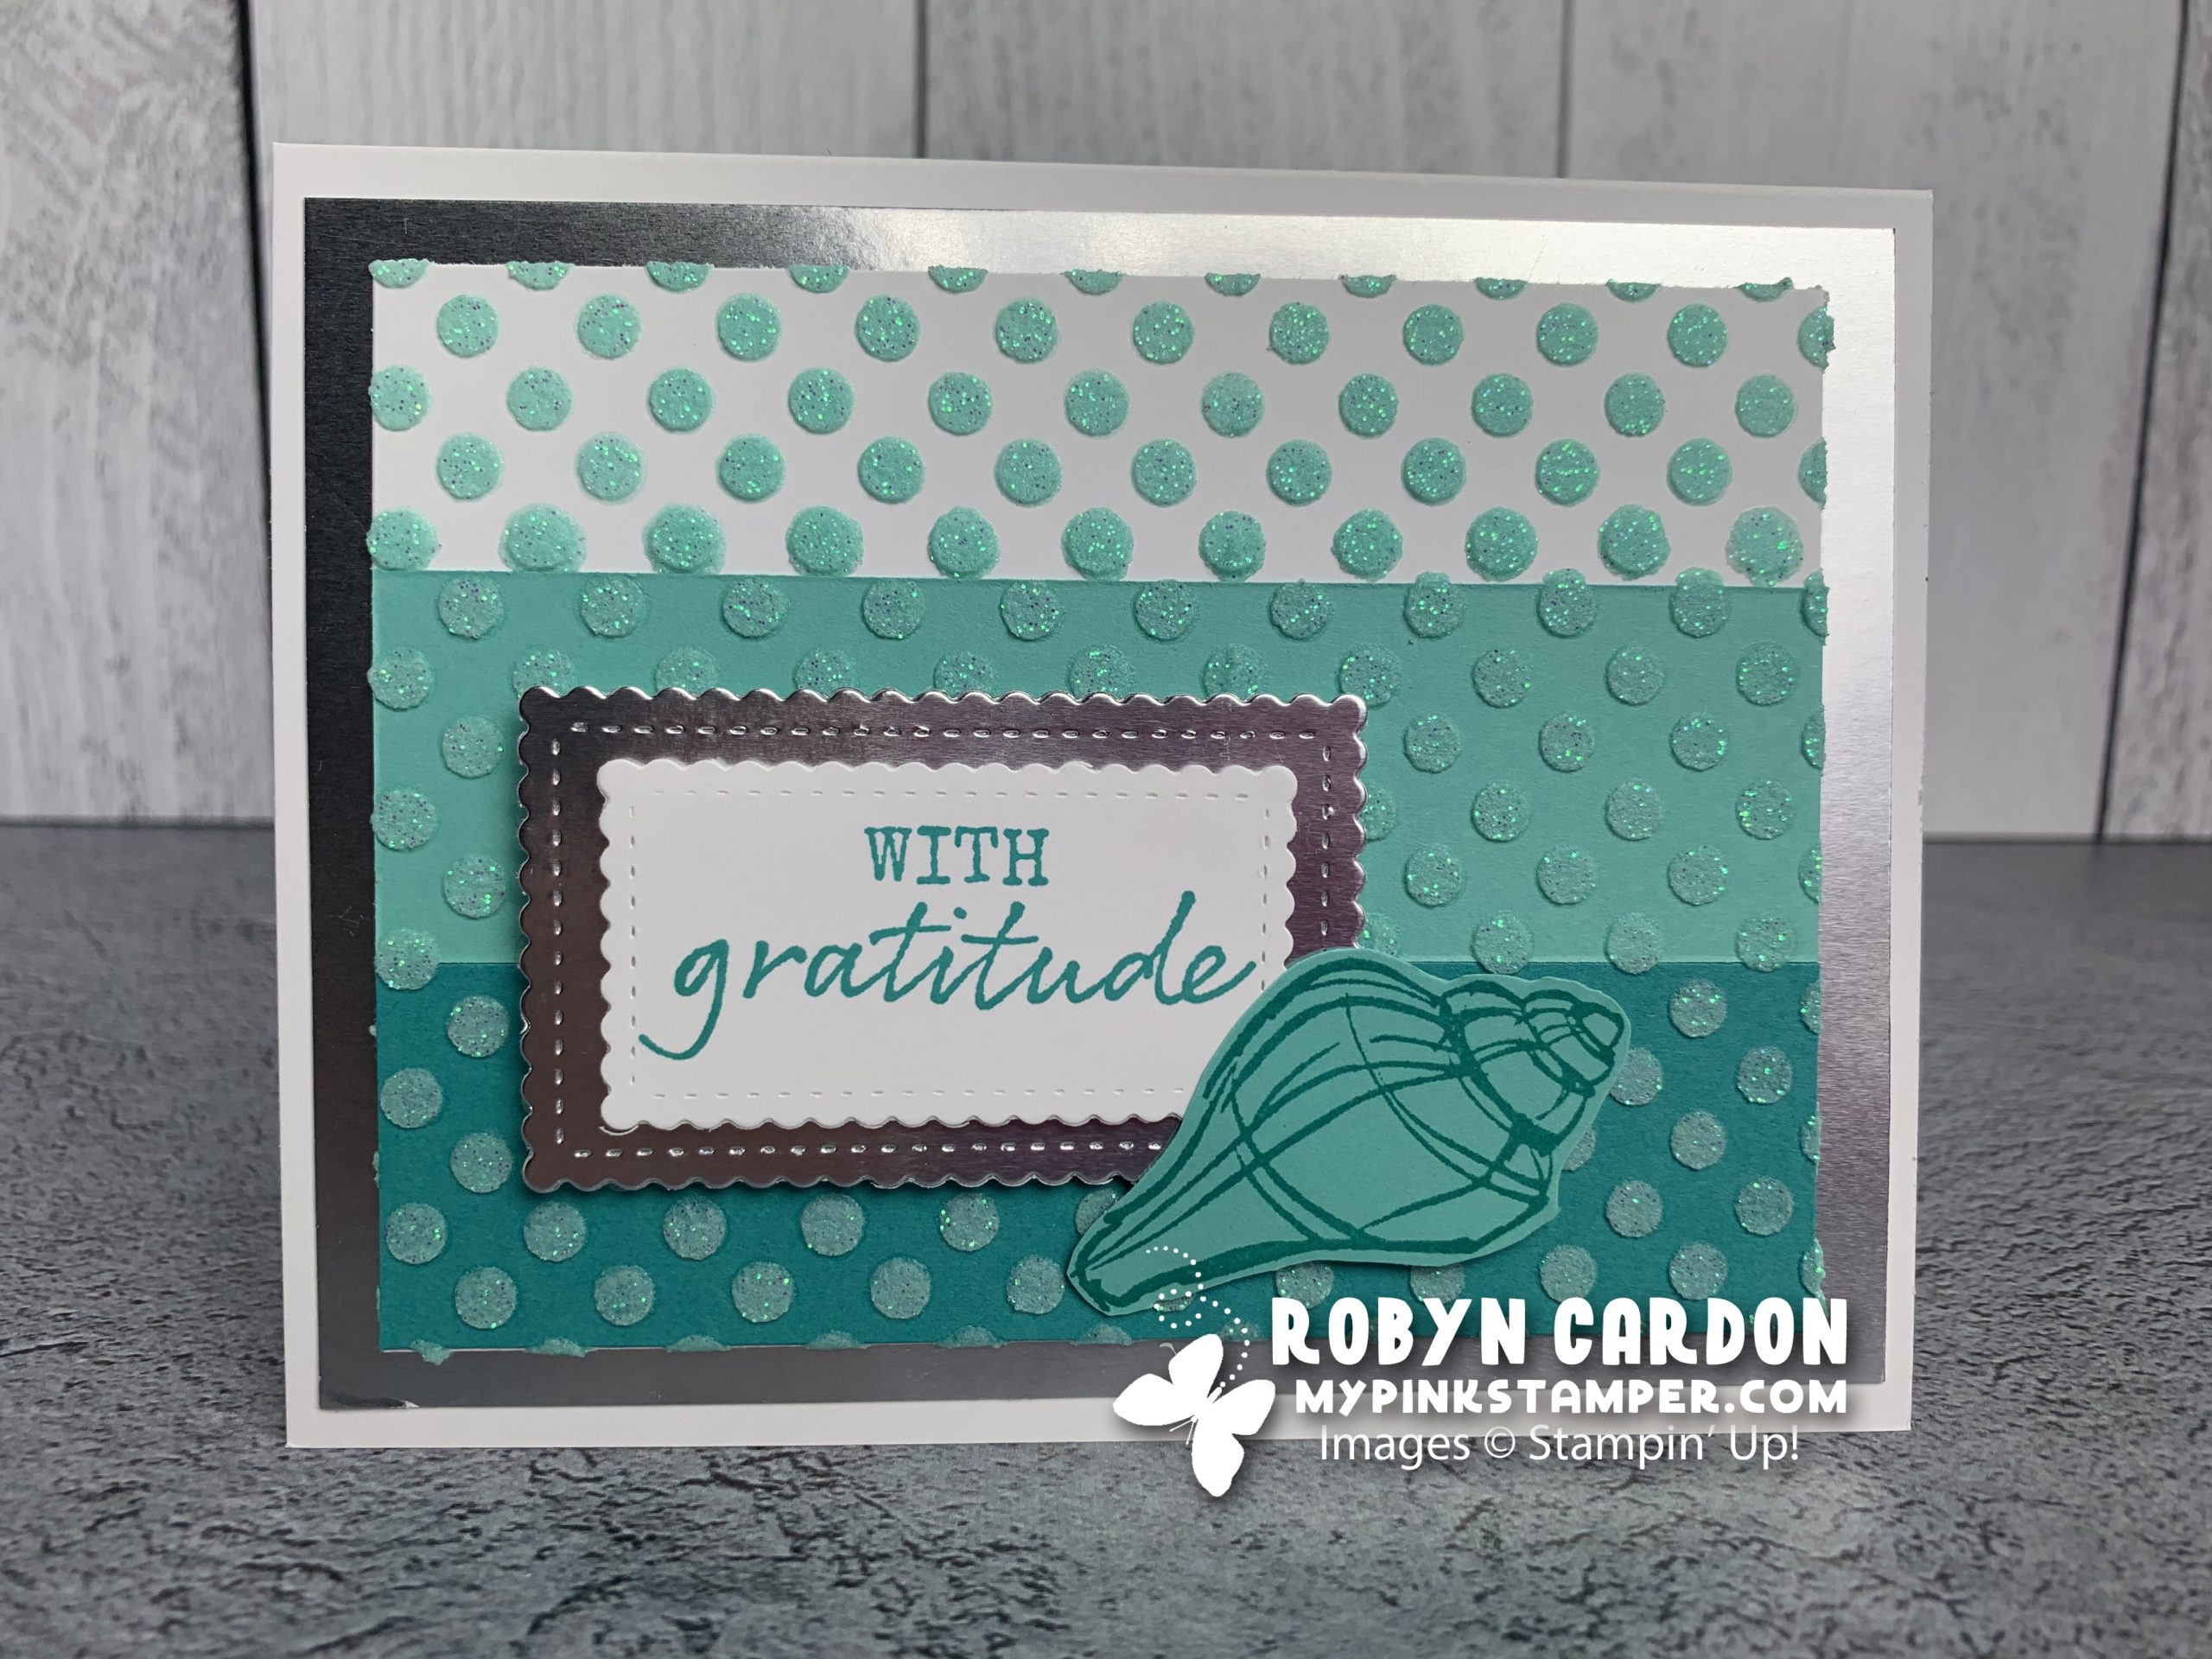 Stampin’ Up!’s Annual Catalog Retiring List – Get your favorites before they are GONE!